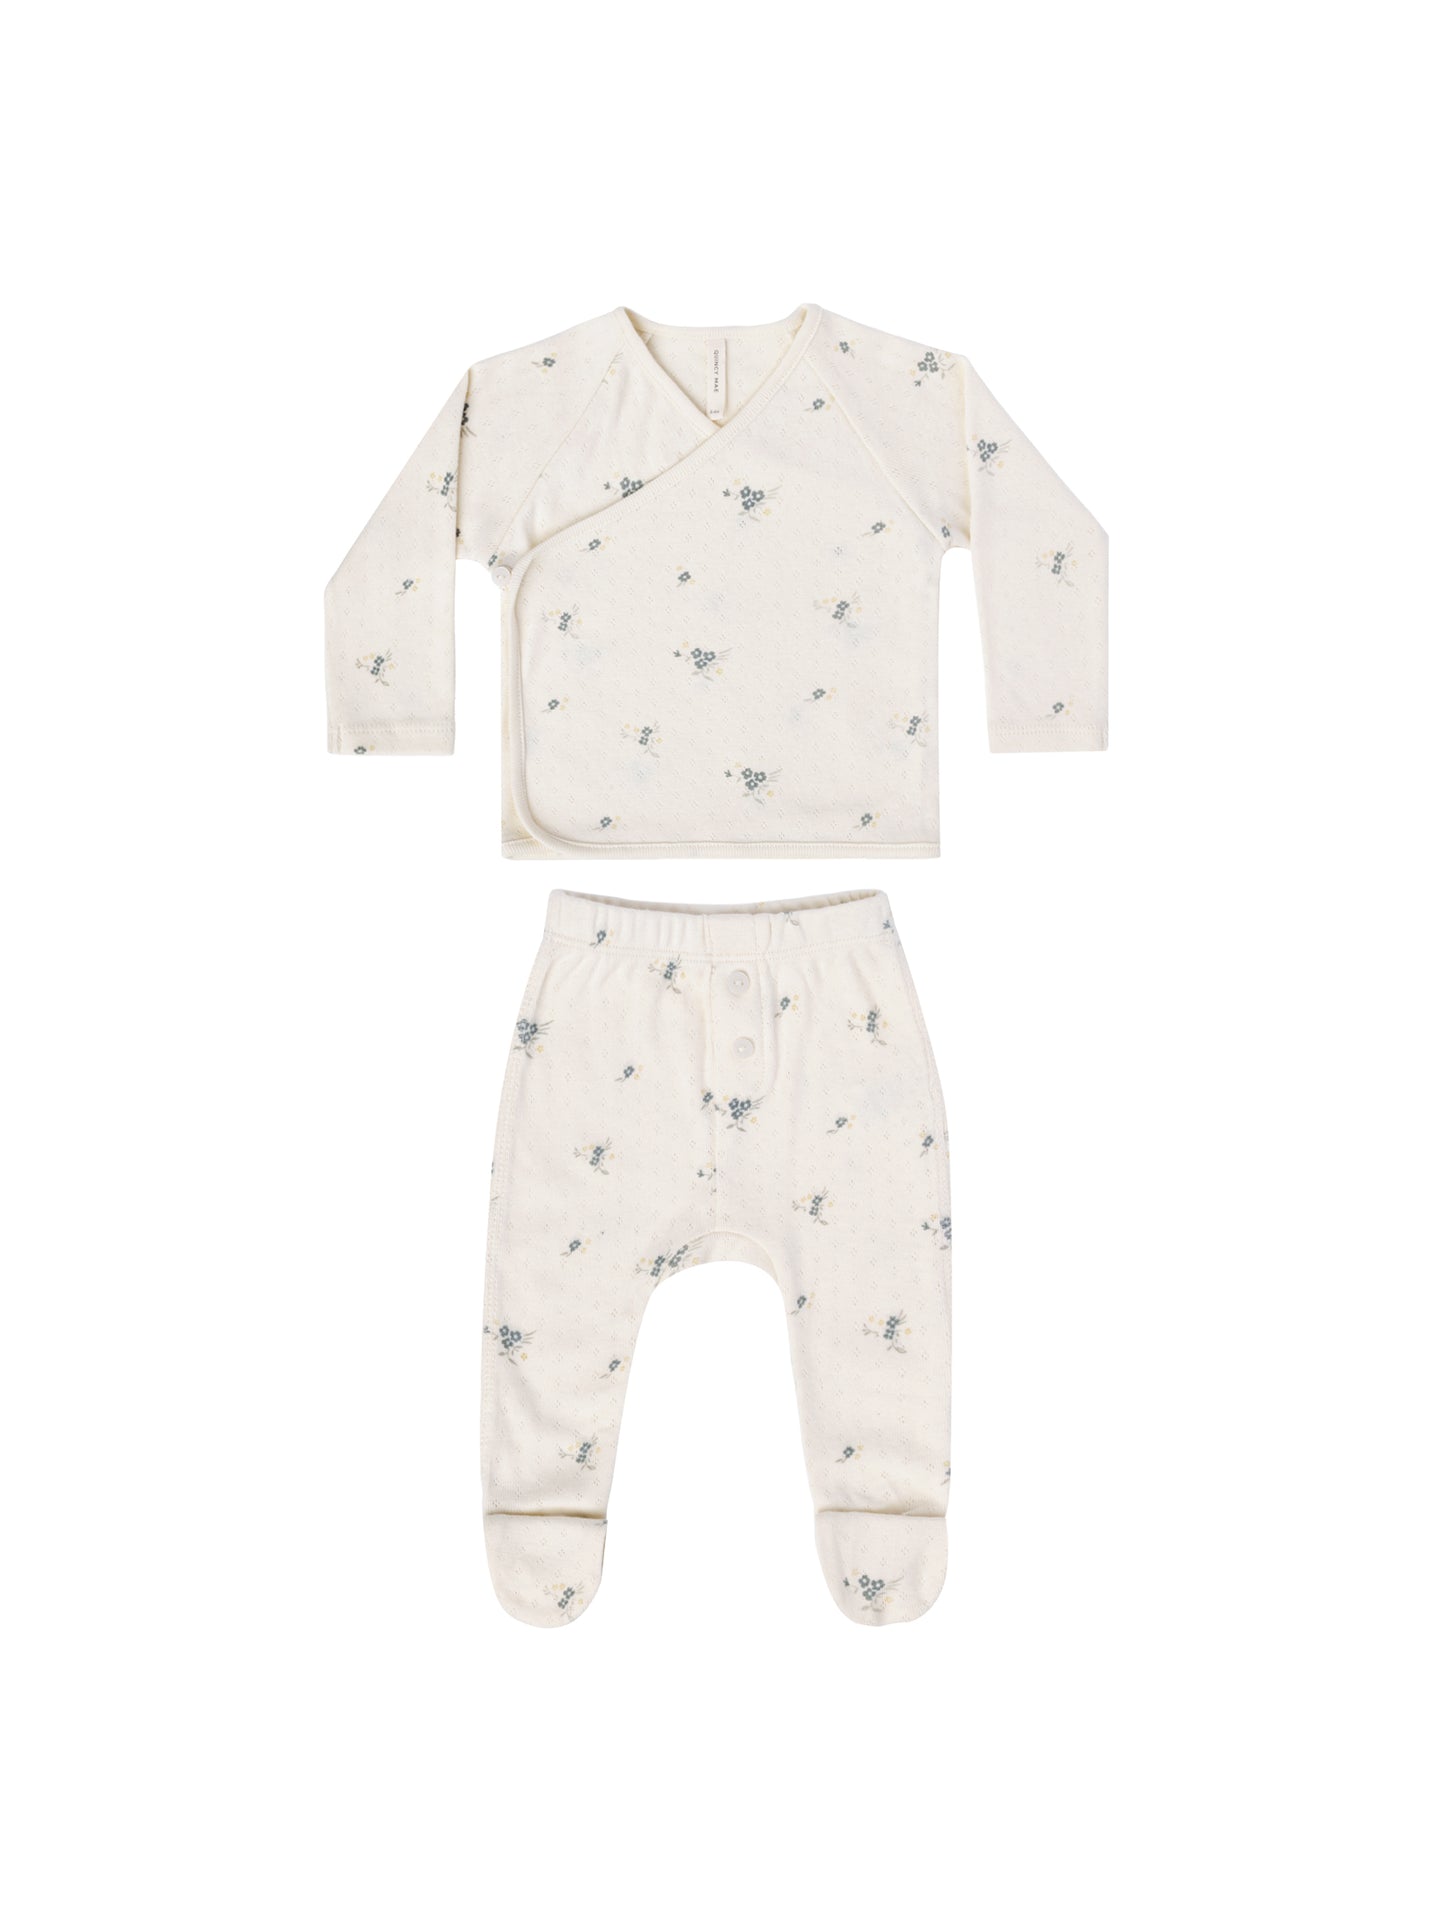 Wrap Top & Footed Pant Set | Ditsy Ocean